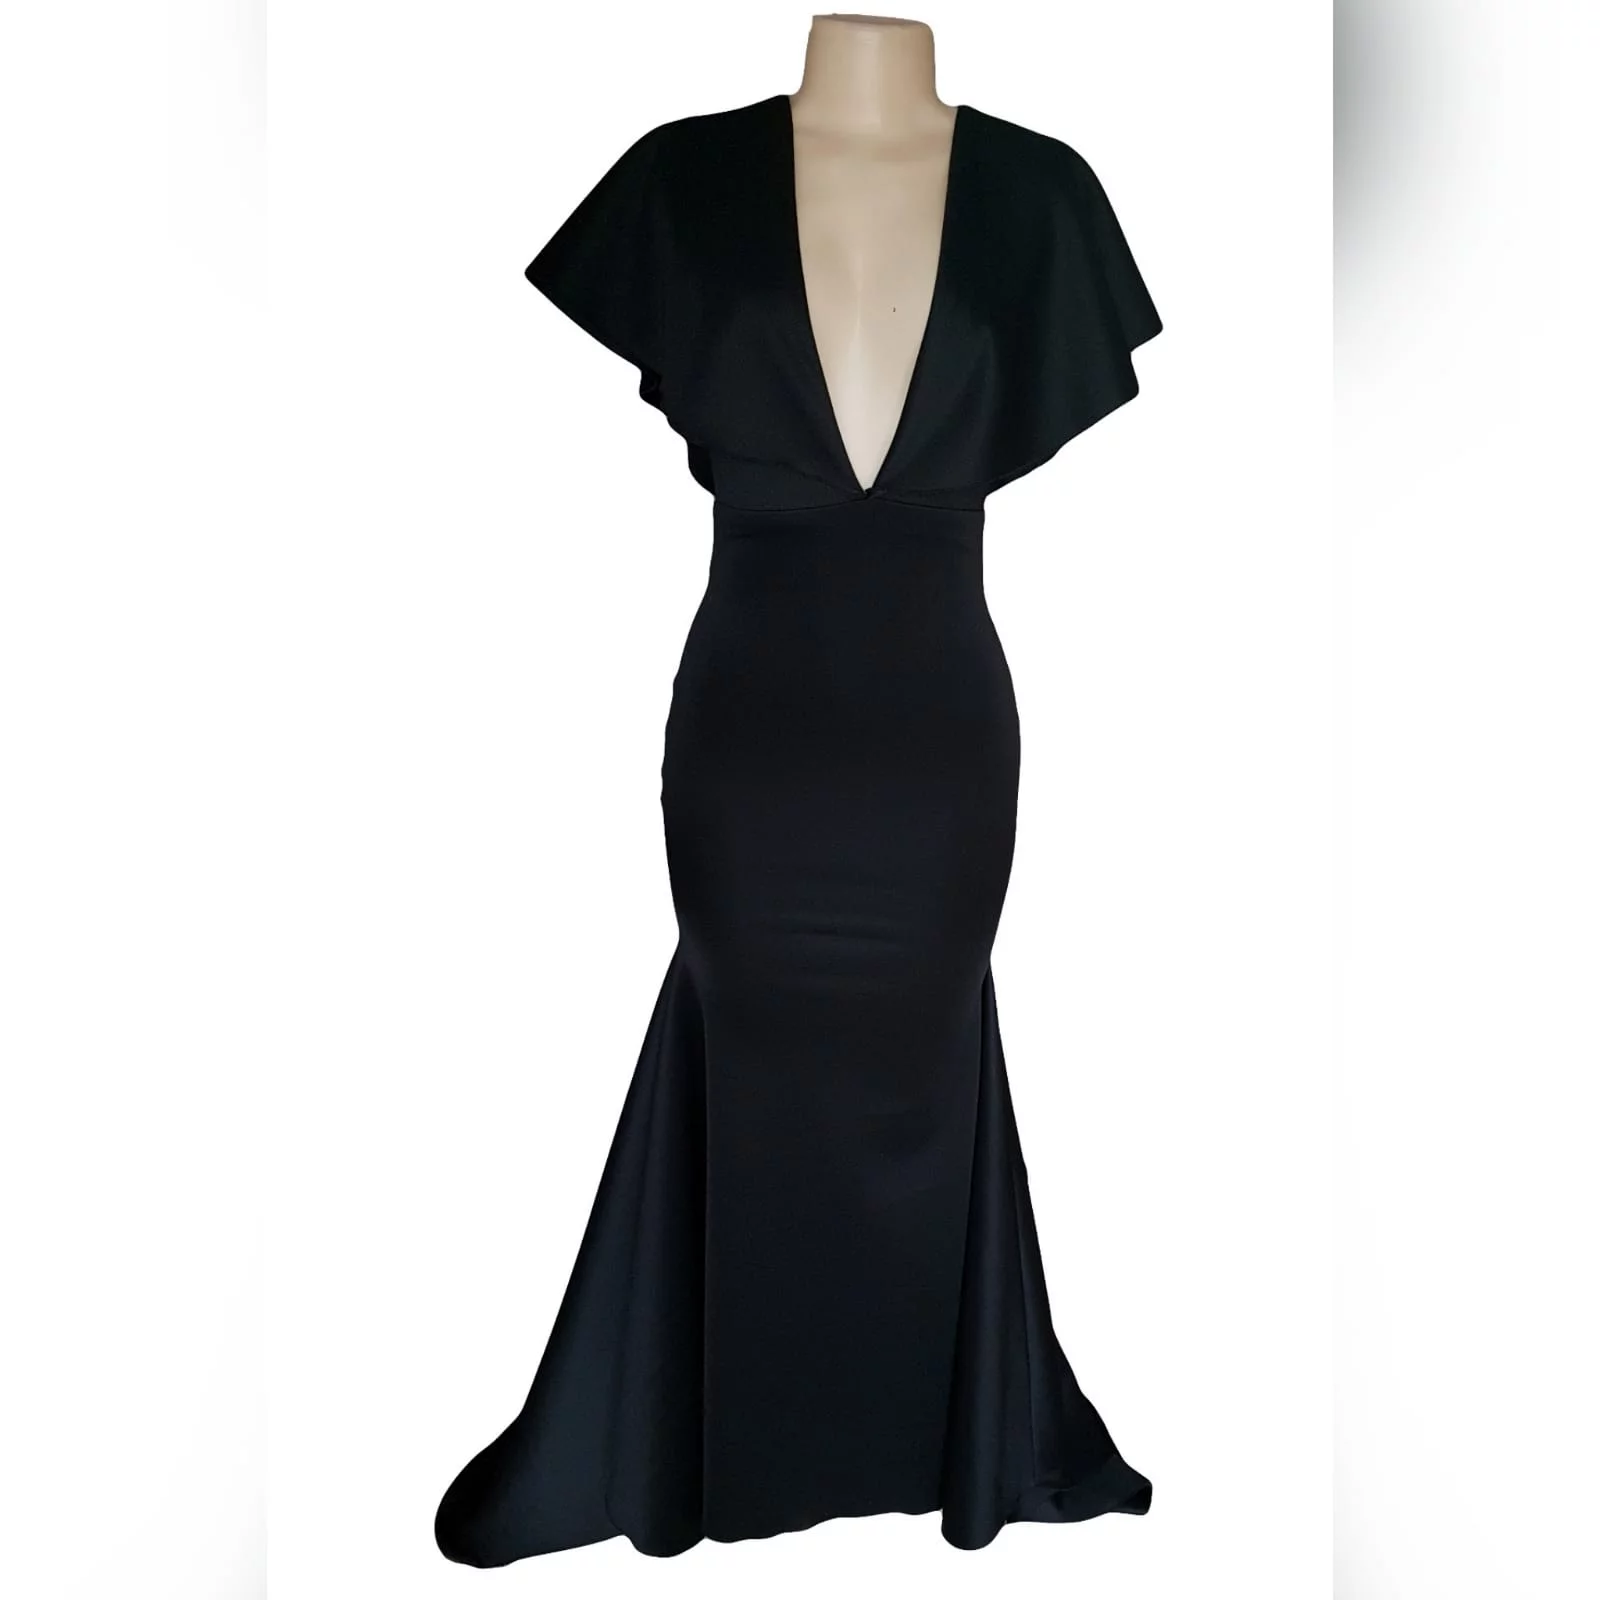 Black soft mermaid simple elegant evening dress 8 black soft mermaid simple elegant evening dress, made for prom night. With a plunging neckline, naked back, wide loose sleeves effect and a train